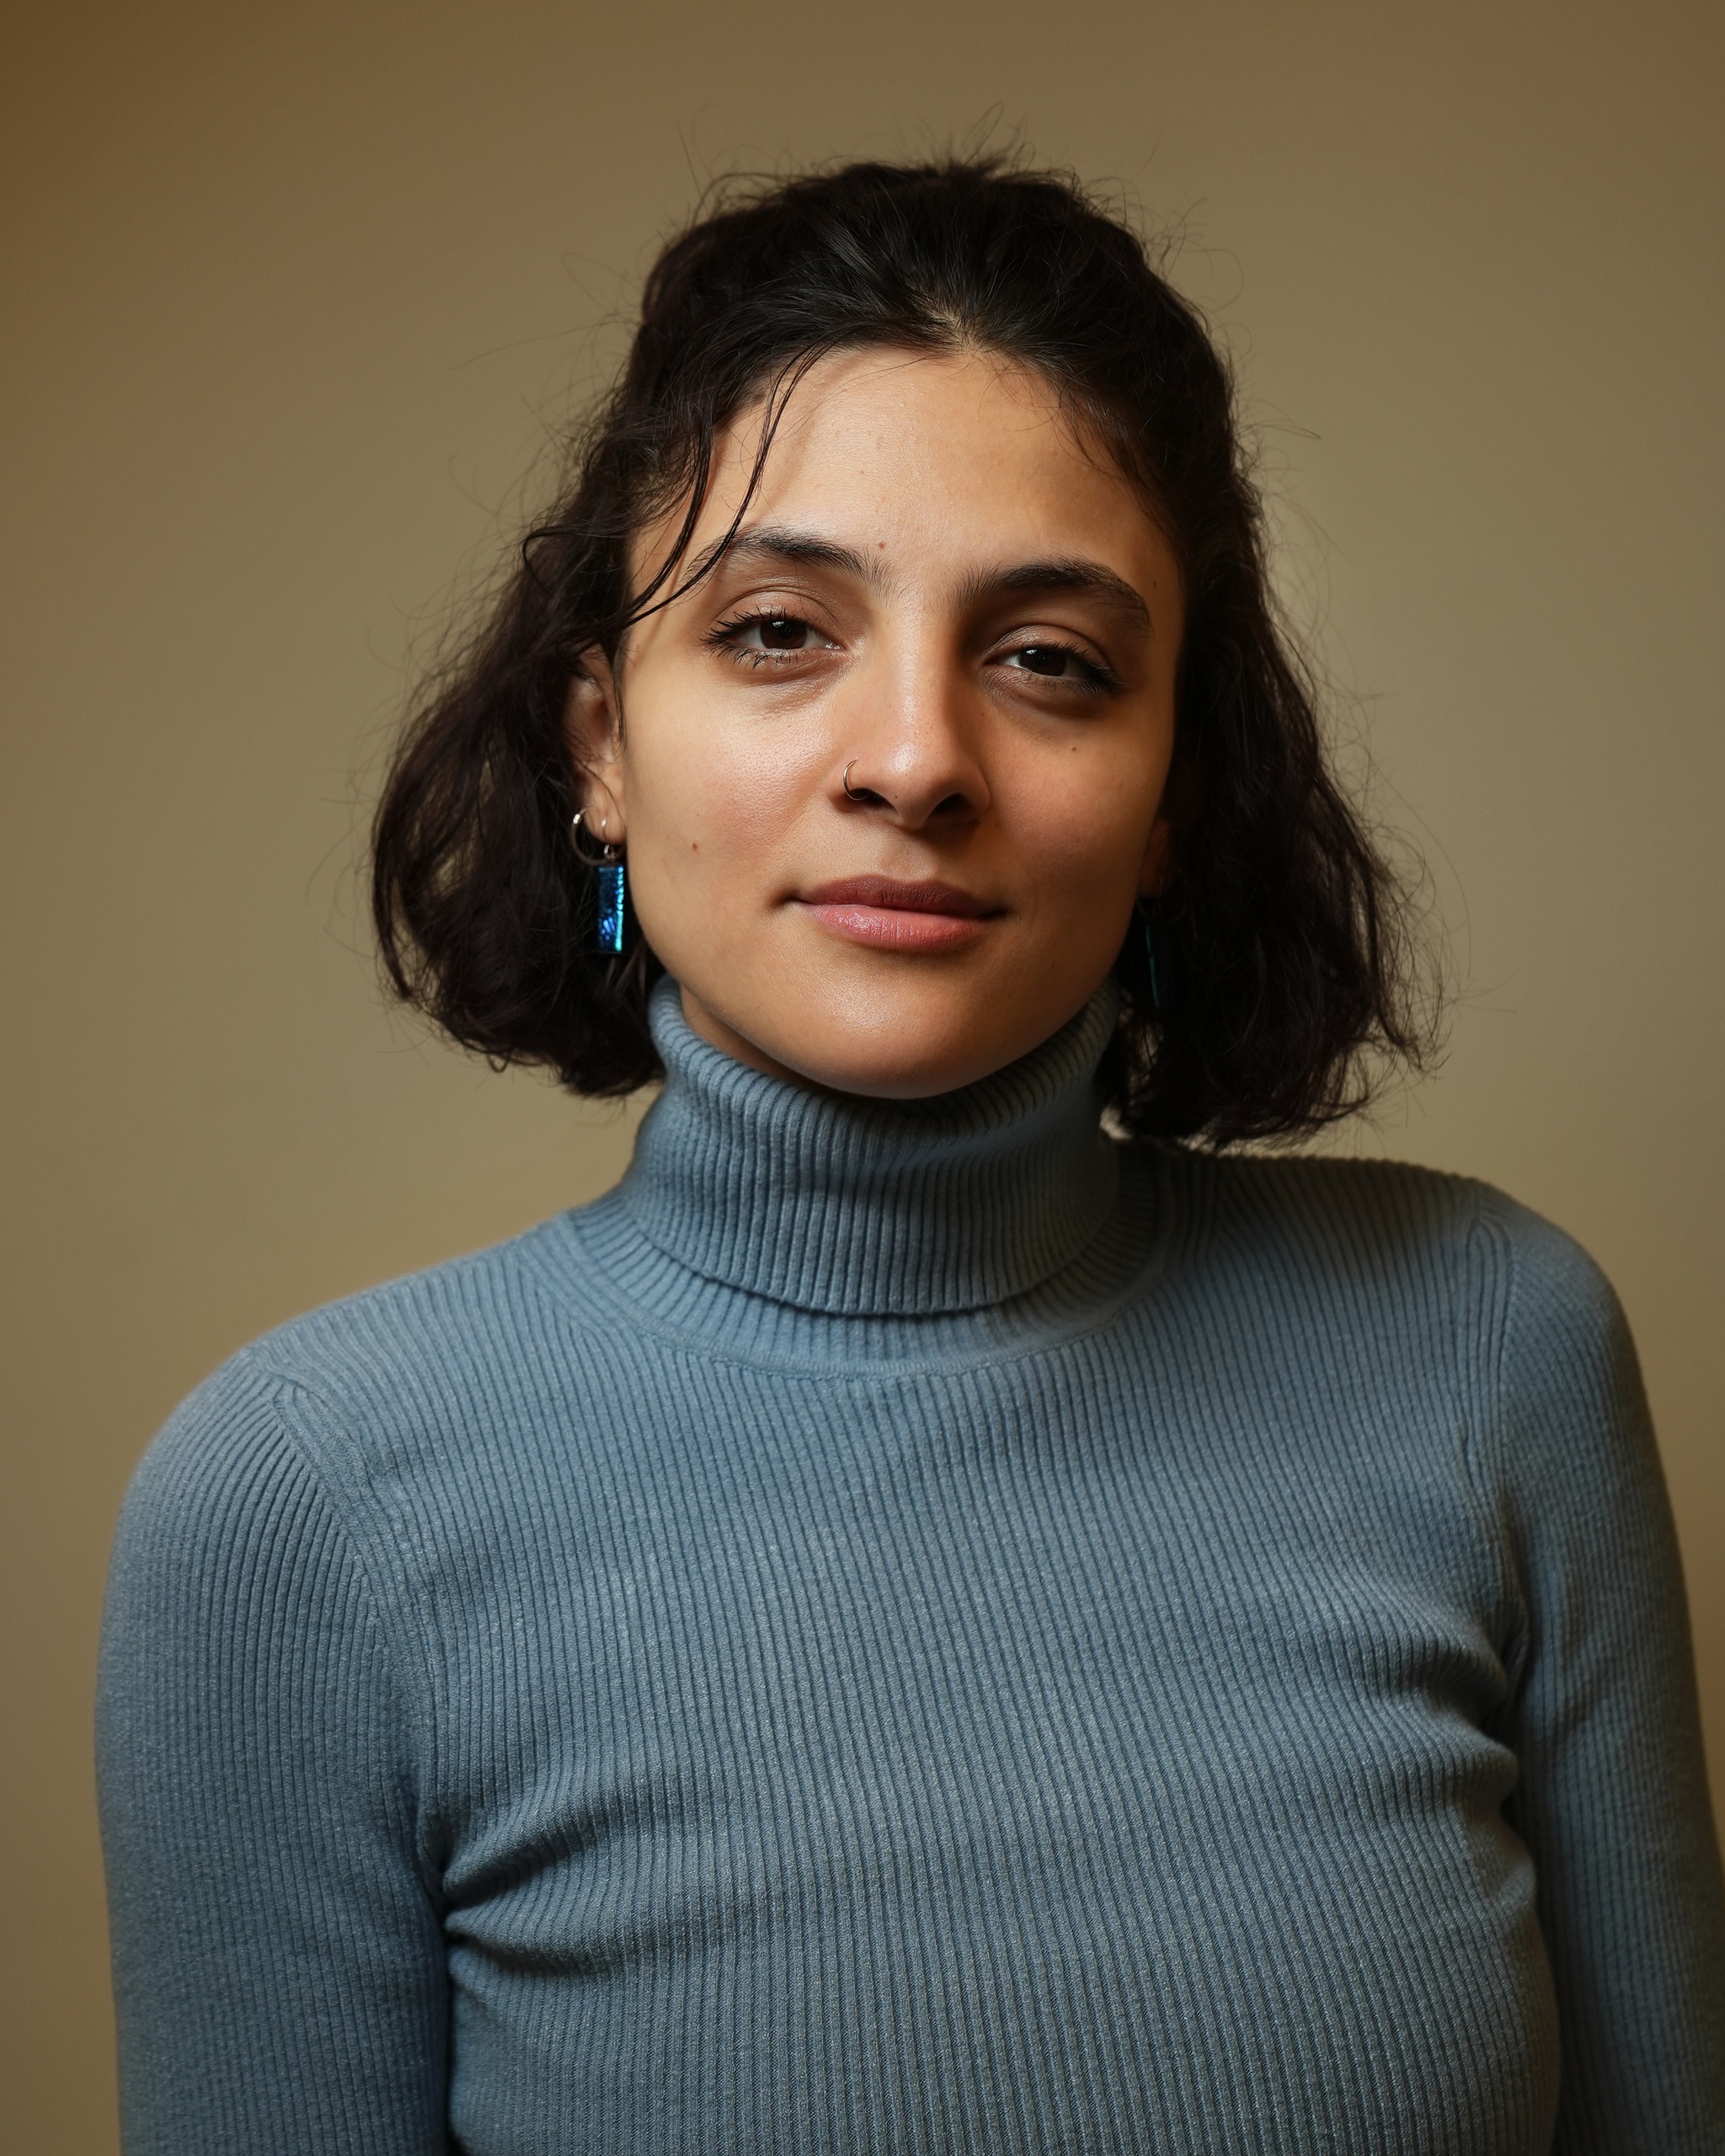 A portrait of Aya Aziz against a neutral brown background. Aya has short dark brown hair that is chin length and pulled half back. She wears a light blue tutrtleneck and looks directly at us, with a slight smile forming on her face. 